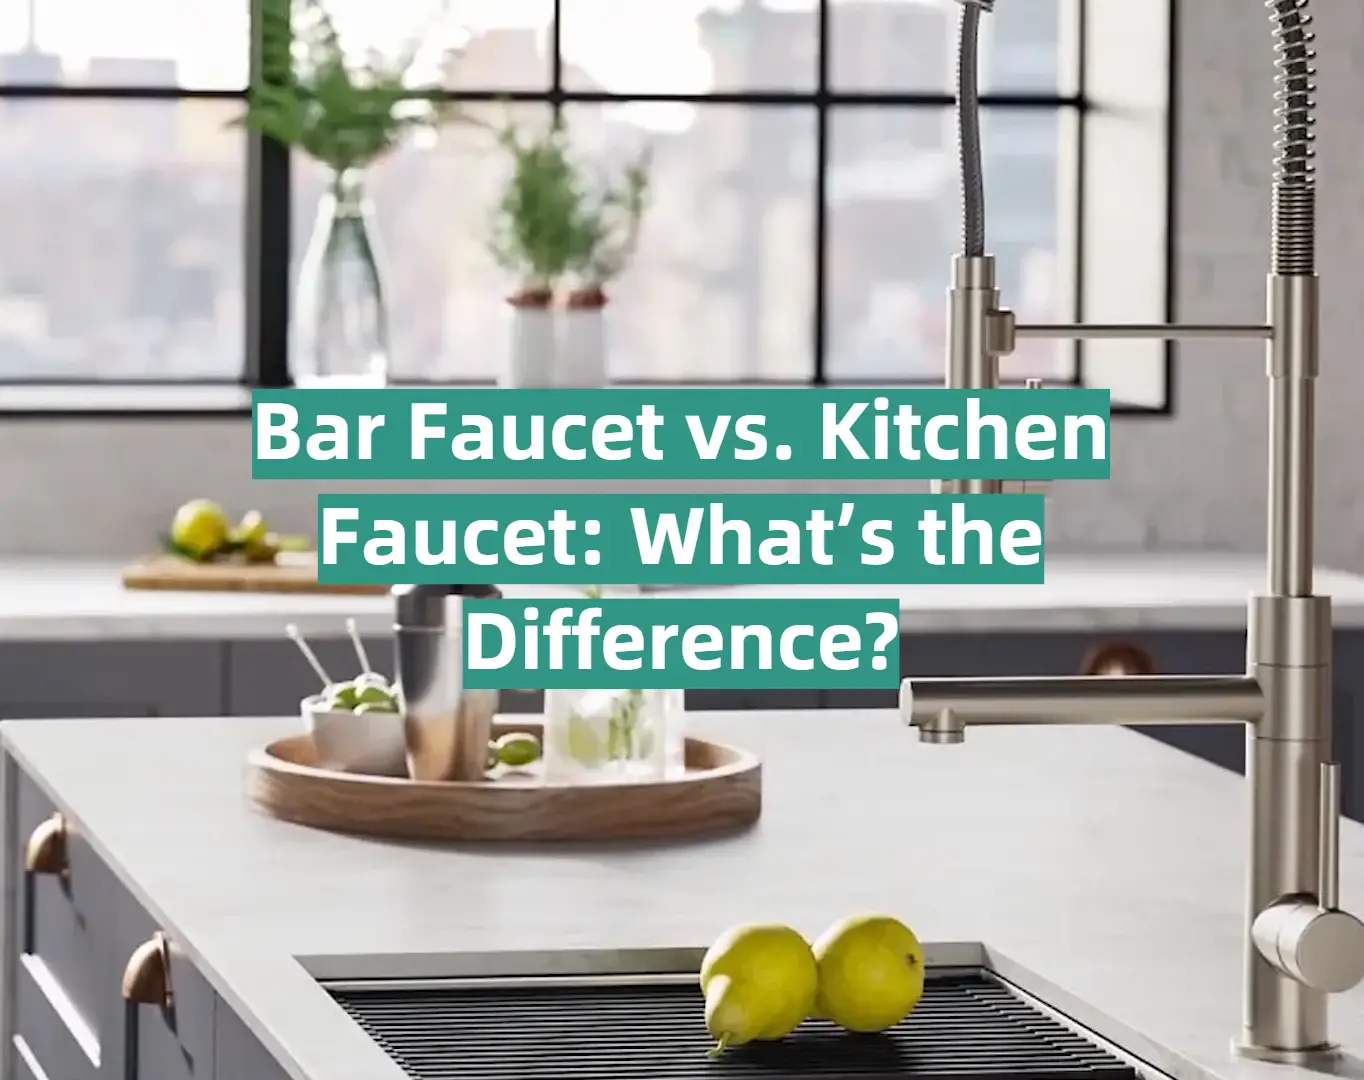 Bar Faucet vs. Kitchen Faucet: What’s the Difference?